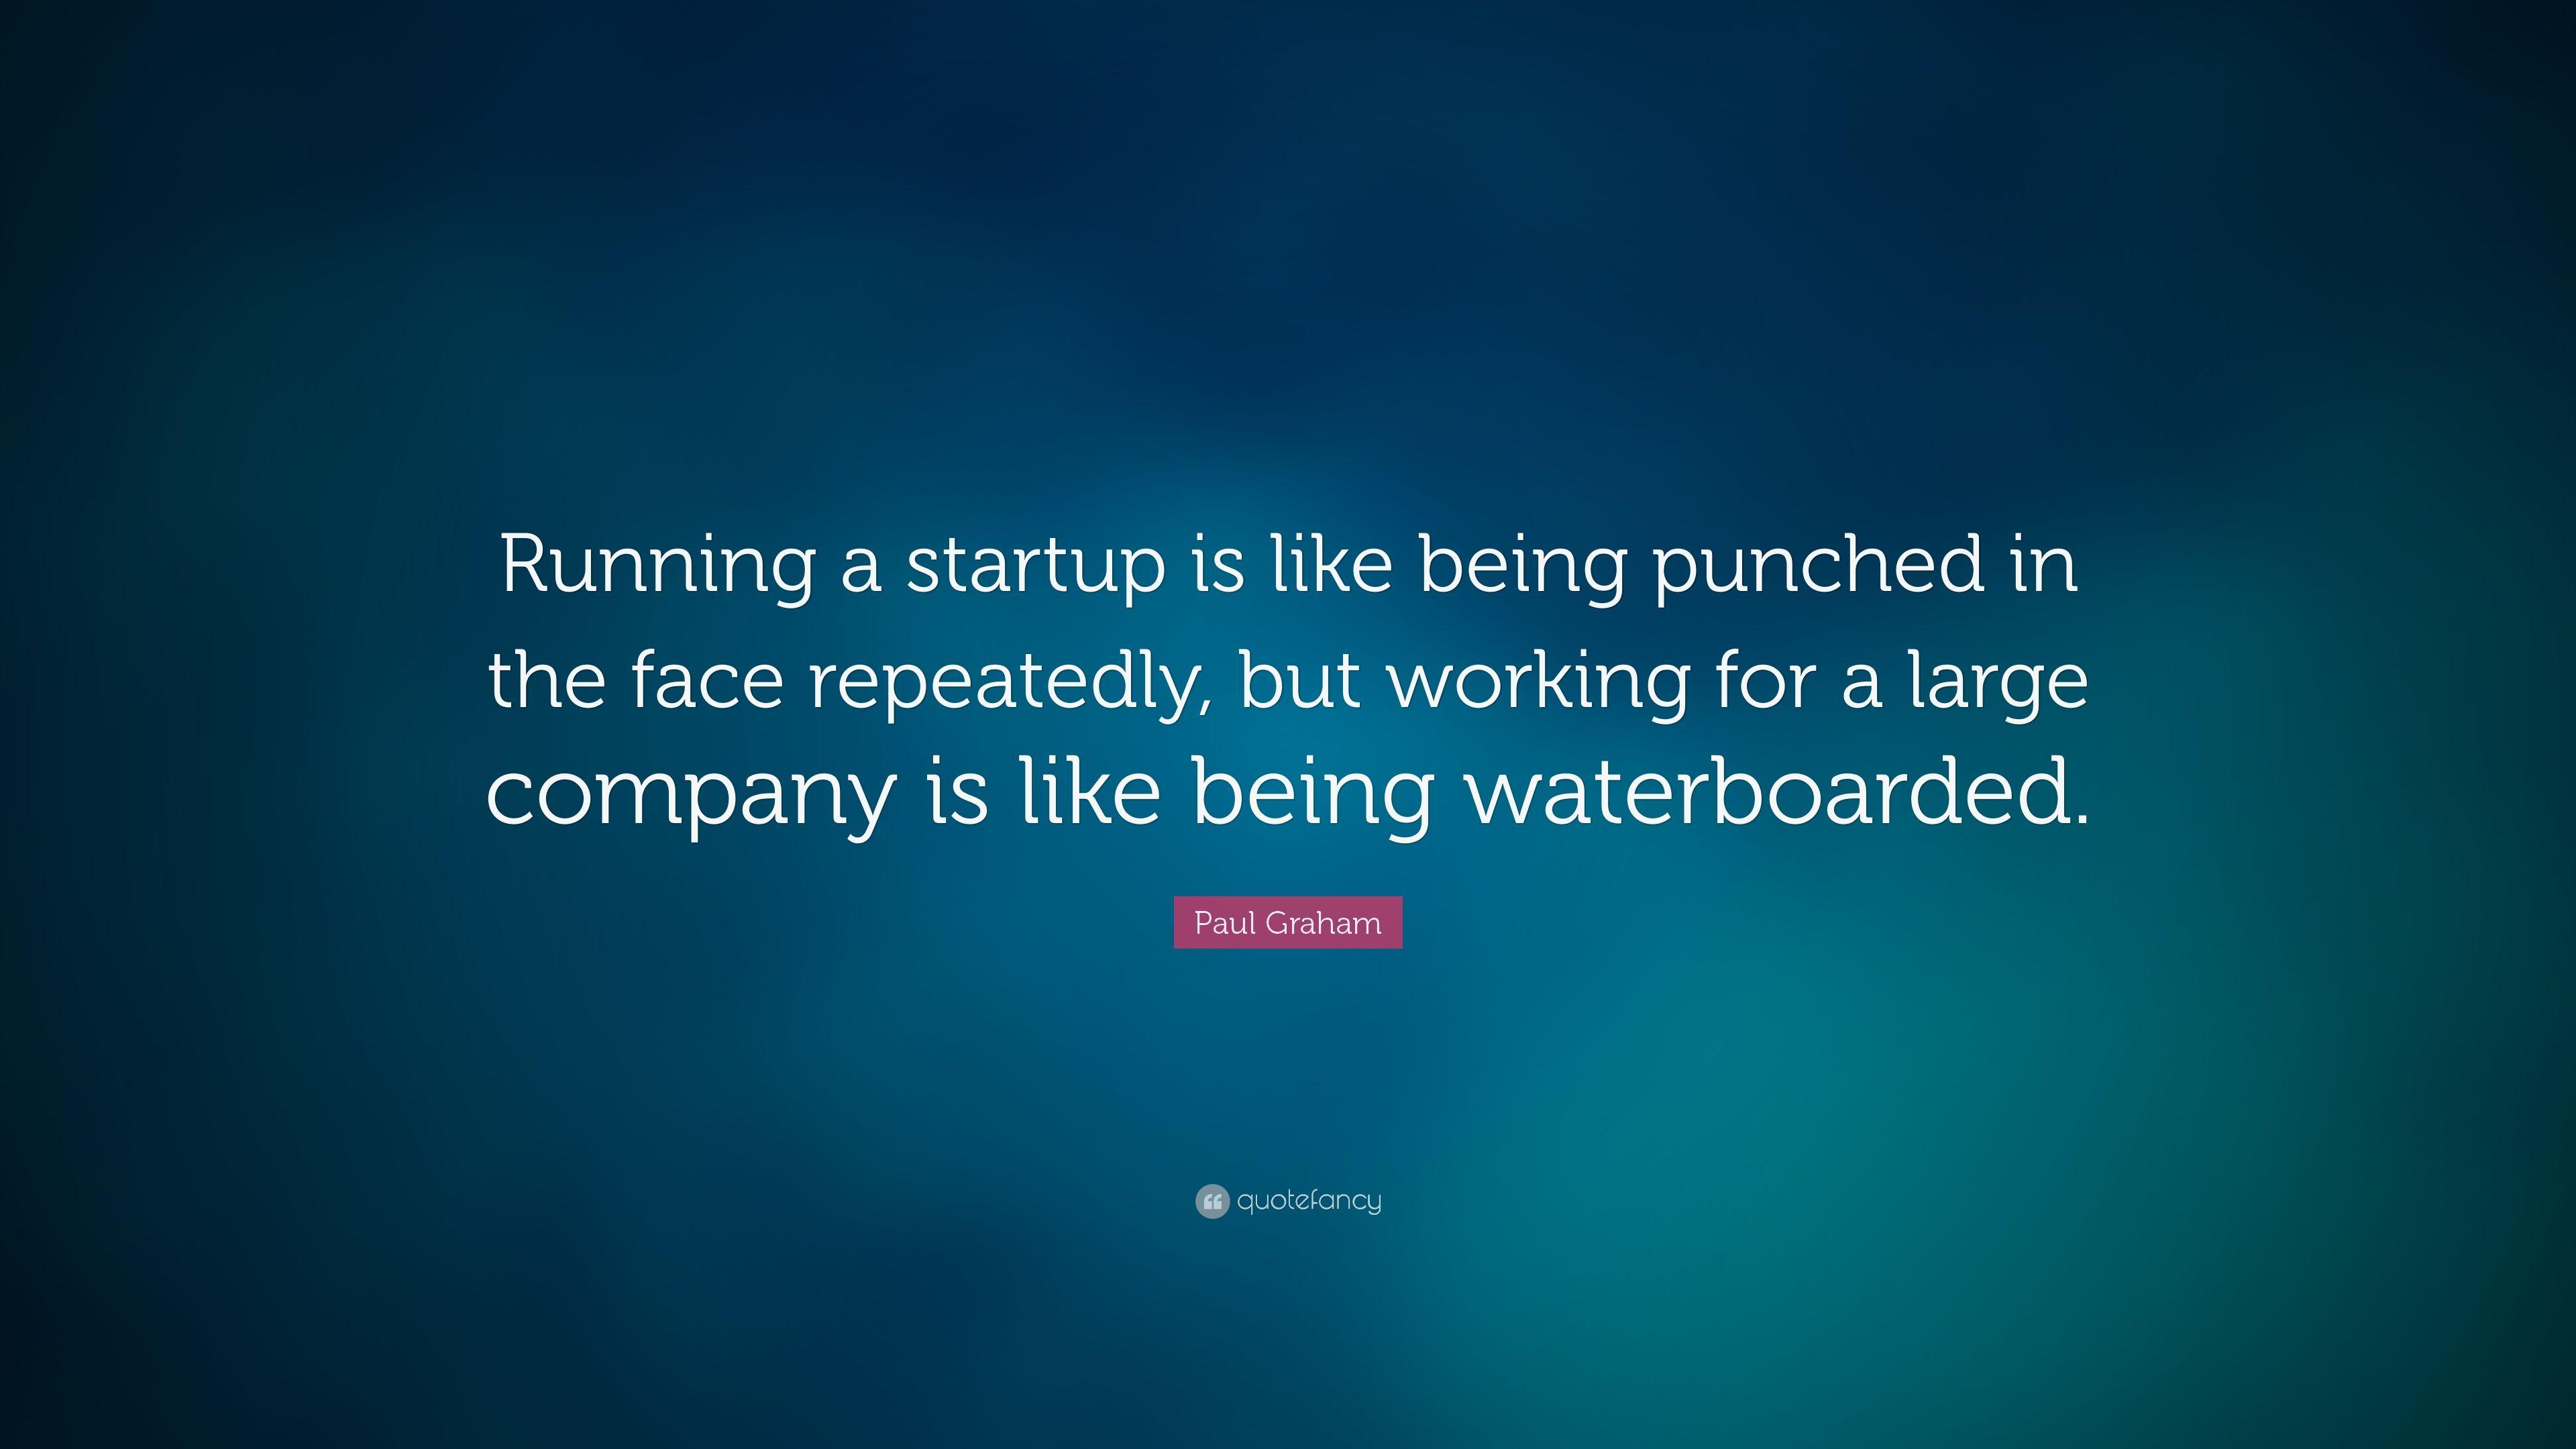 Paul Graham Quote: “Running a startup is like being punched in